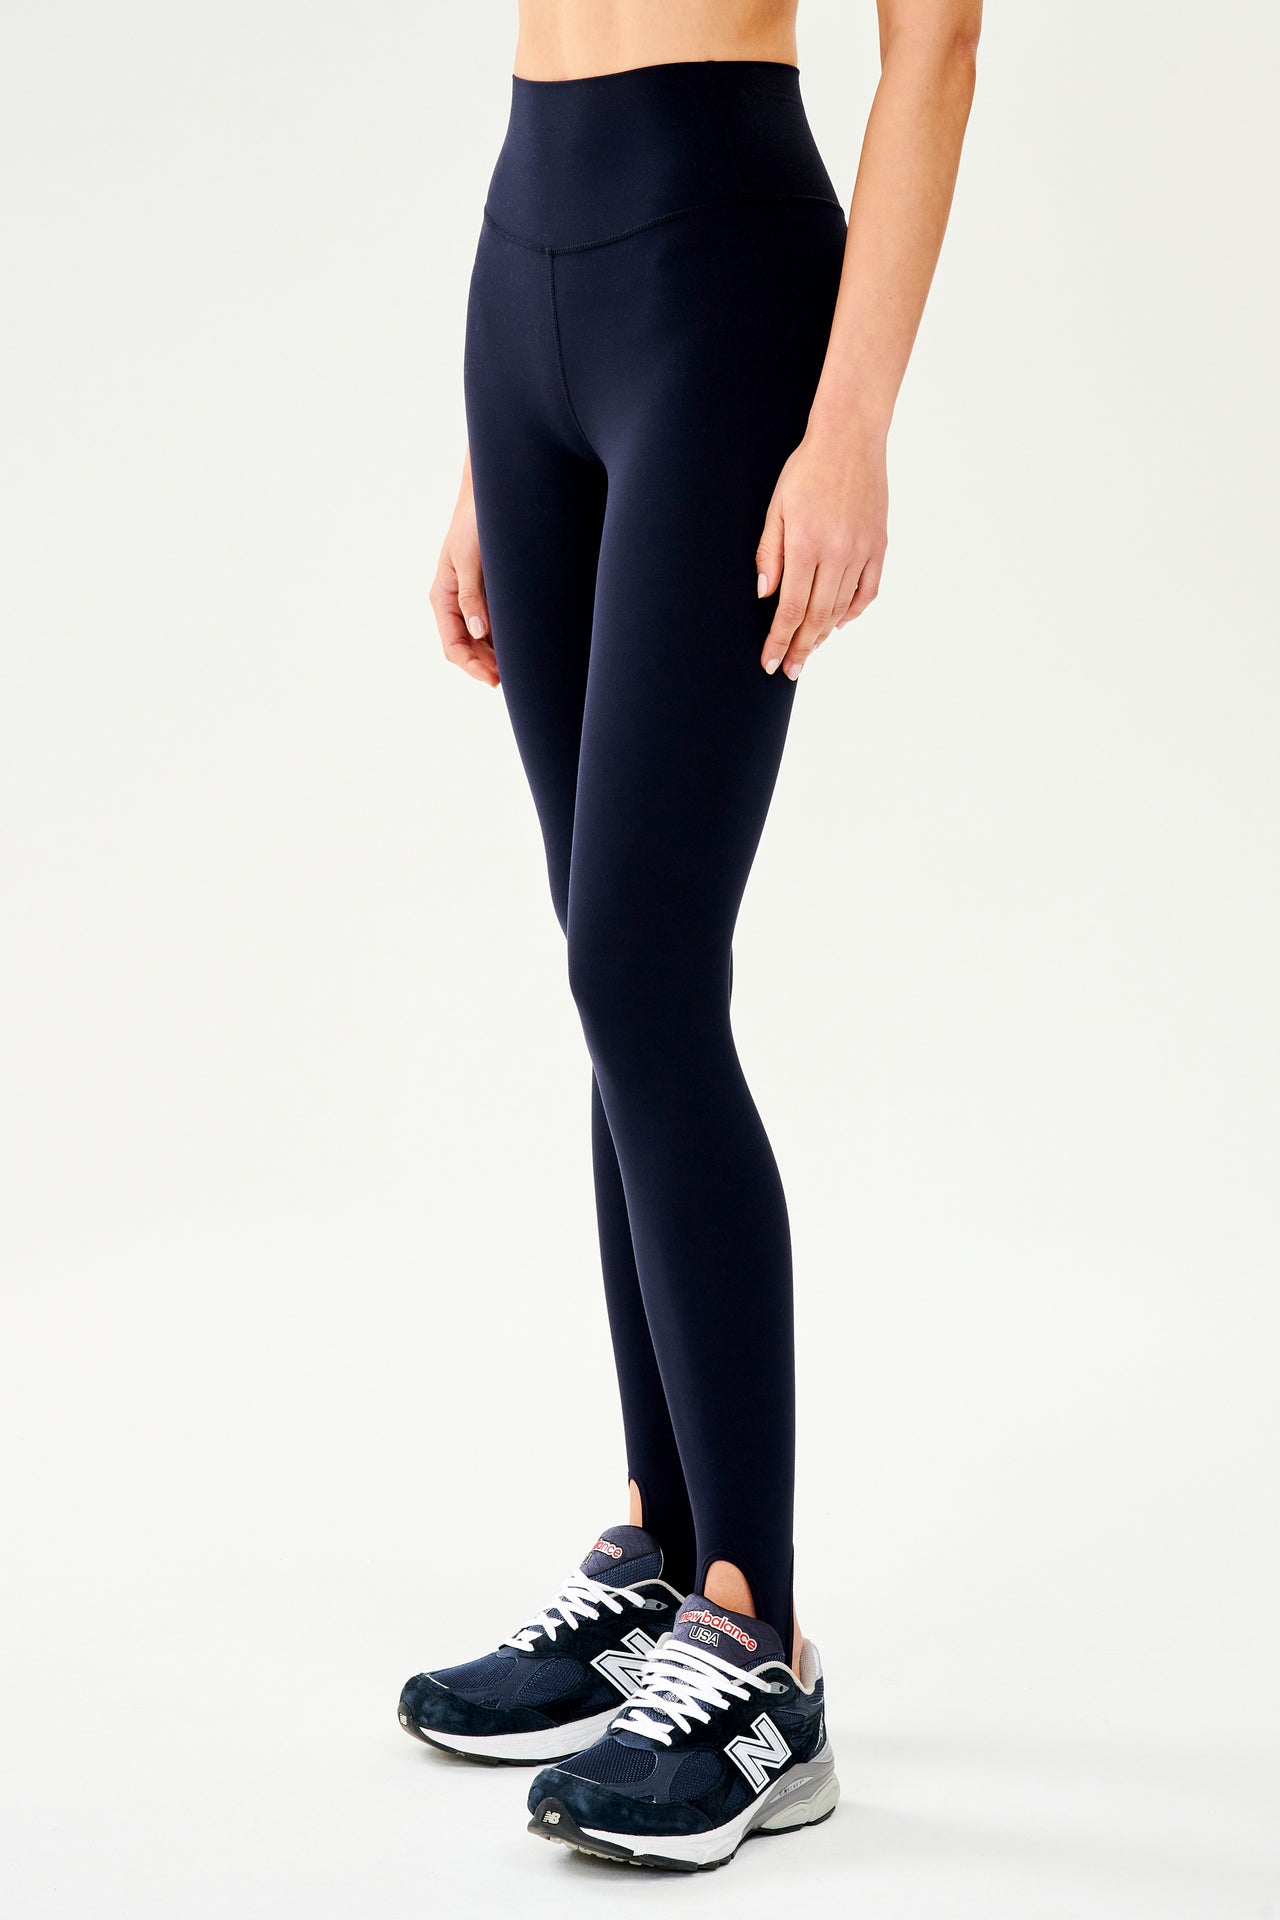 Front side view of dark blue leggings with bottom strap that wraps around the foot paired with dark blue and white shoes